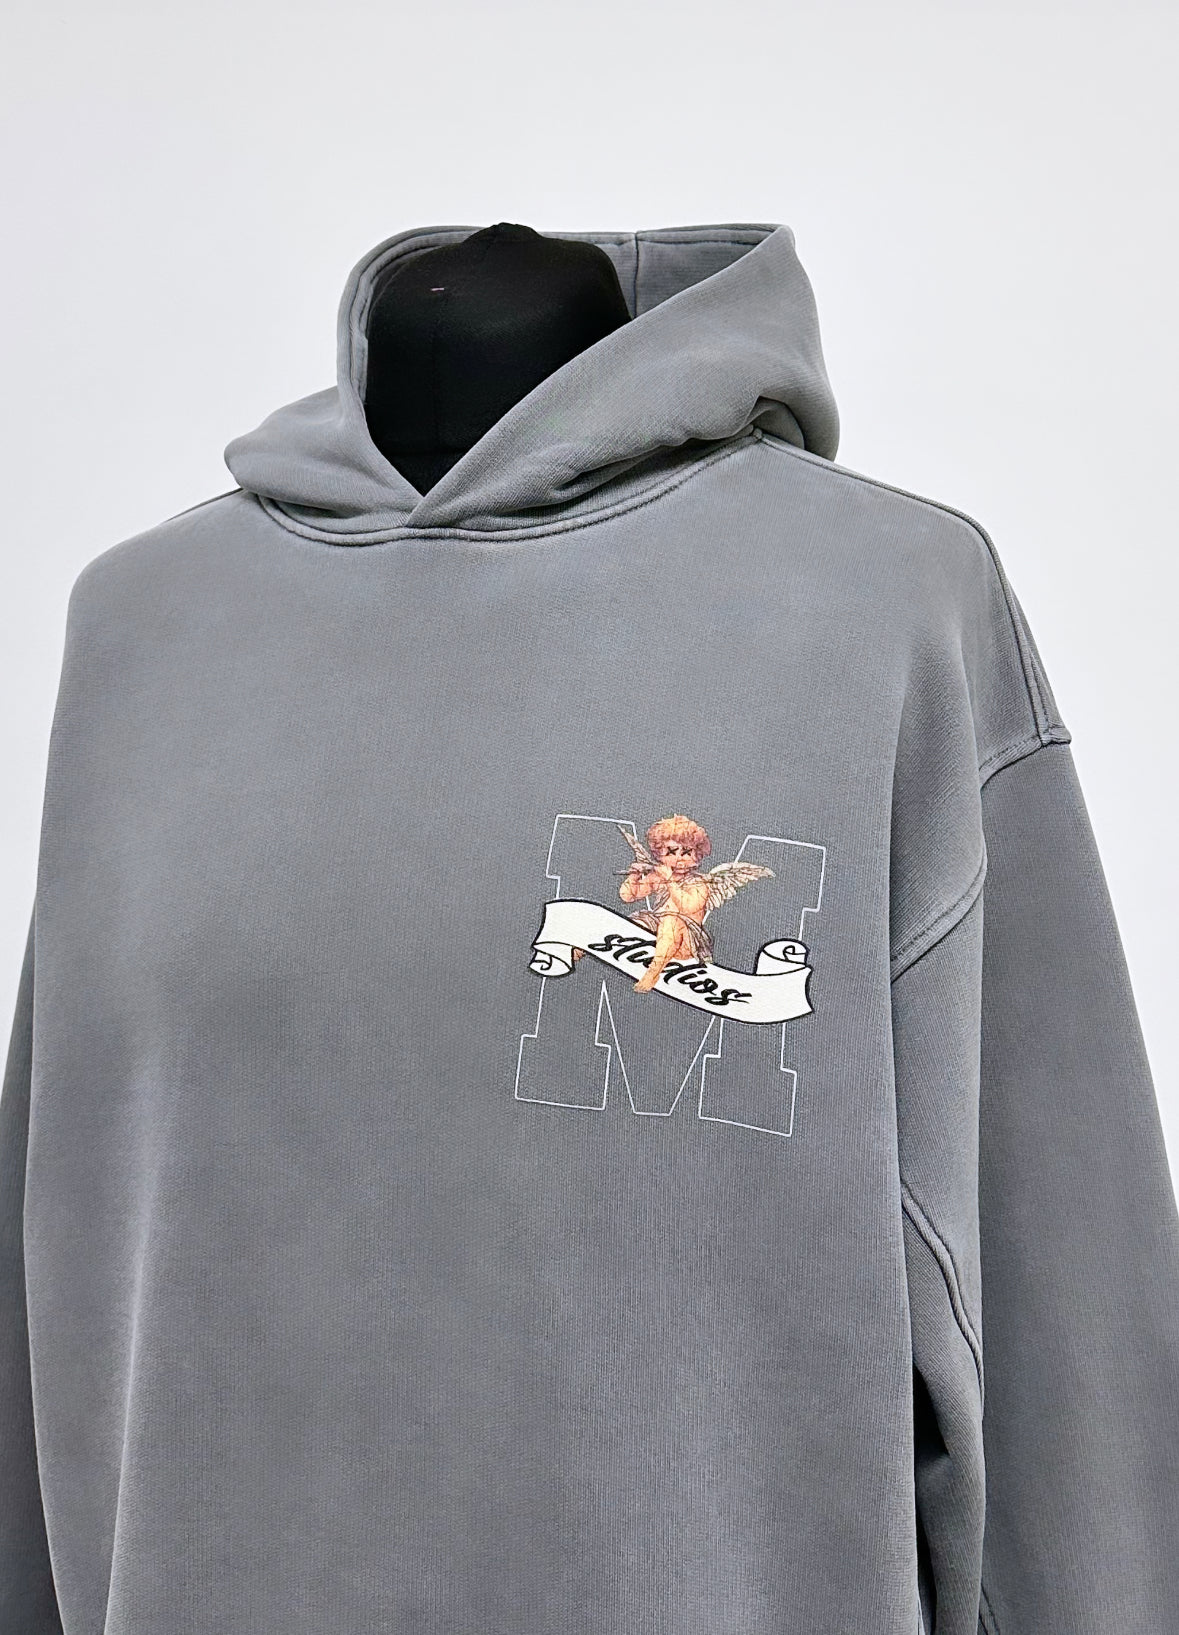 Washed Charcoal Heavyweight Graphic Hoodie.